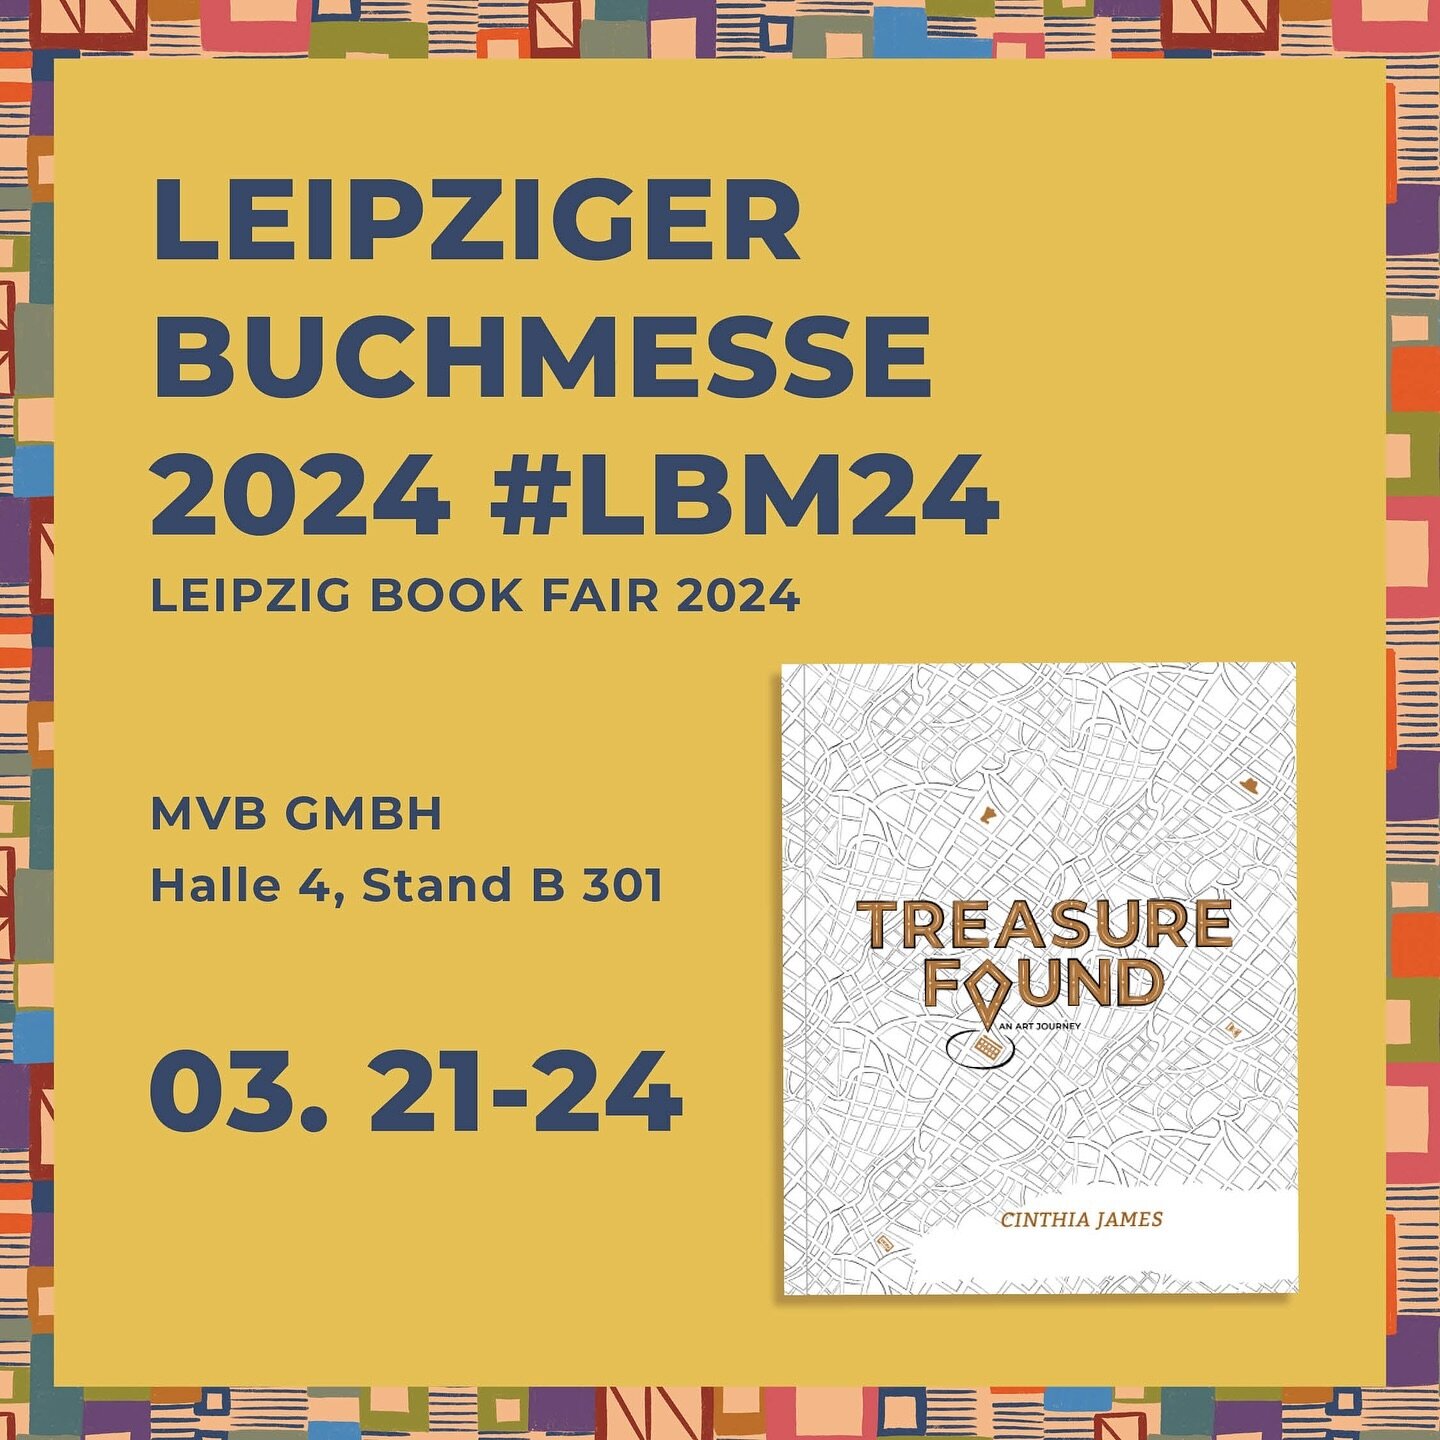 English Version:

🎉 Exciting News! 🎉 My book &ldquo;Treasure Found: An Art Journey&rdquo; will be on display at the Leipzig Book Fair from March 21-24! Find us at the MVB GmbH Livro Community Exhibition in Hall 4, Booth B 301. Can&rsquo;t wait to s